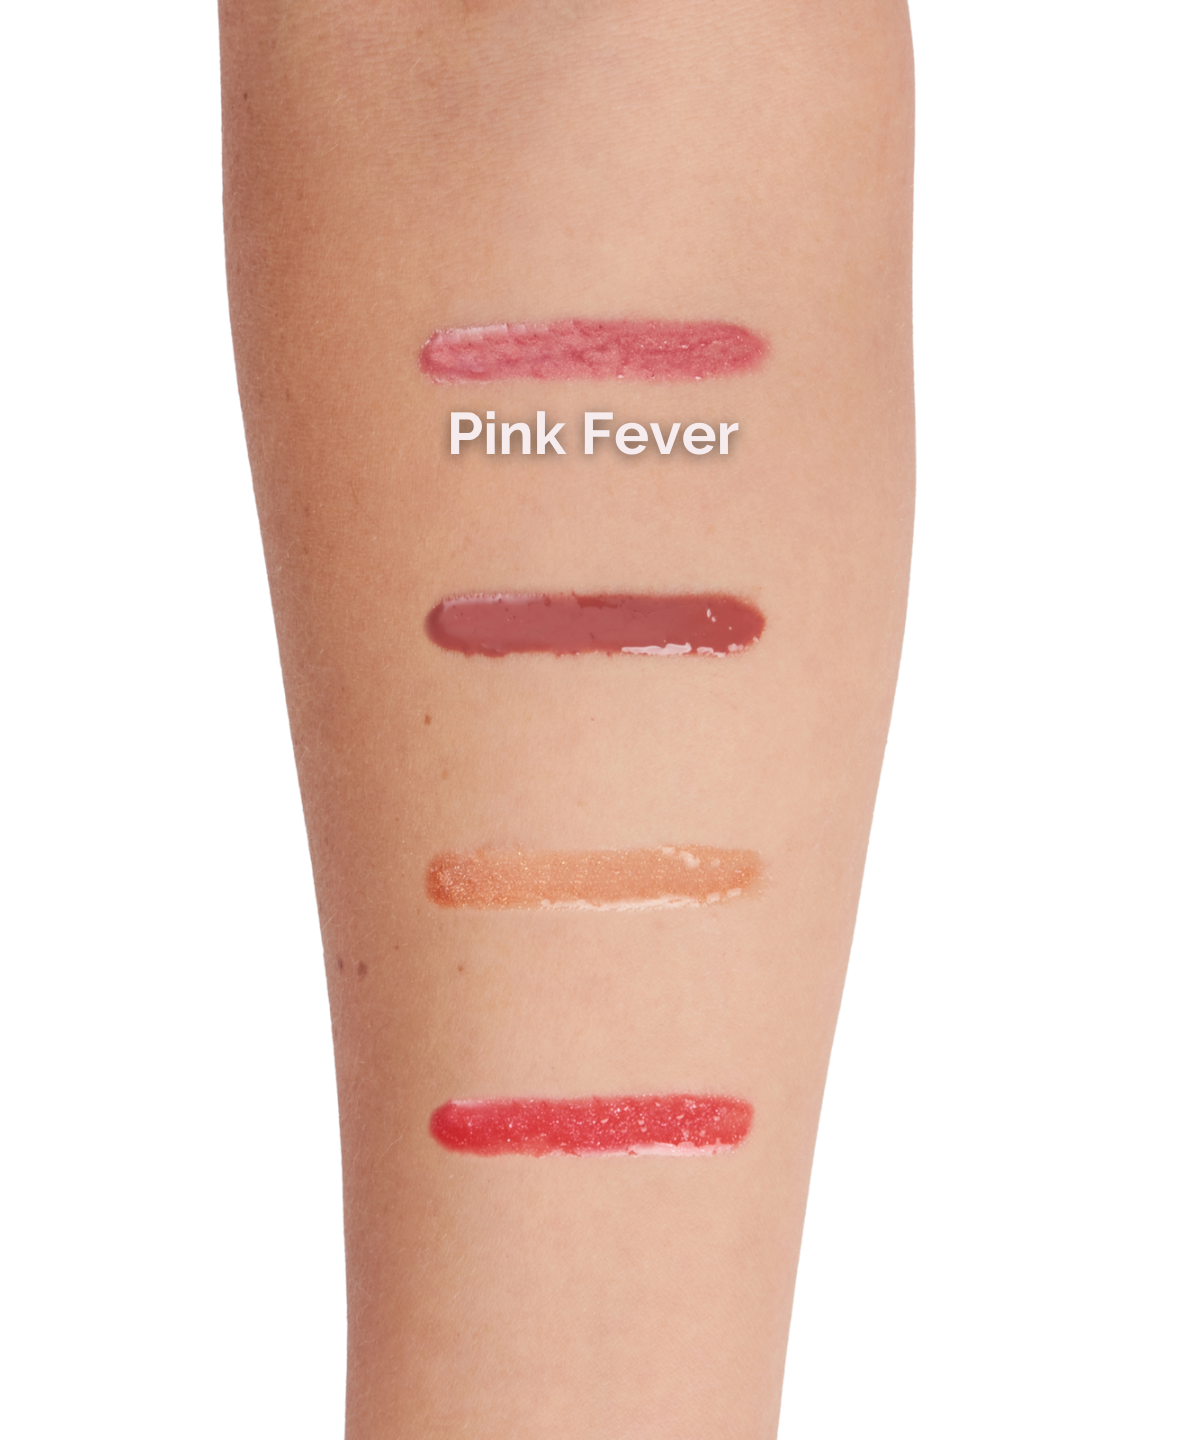 Lip Gloss Pink Fever - Gil Cagné